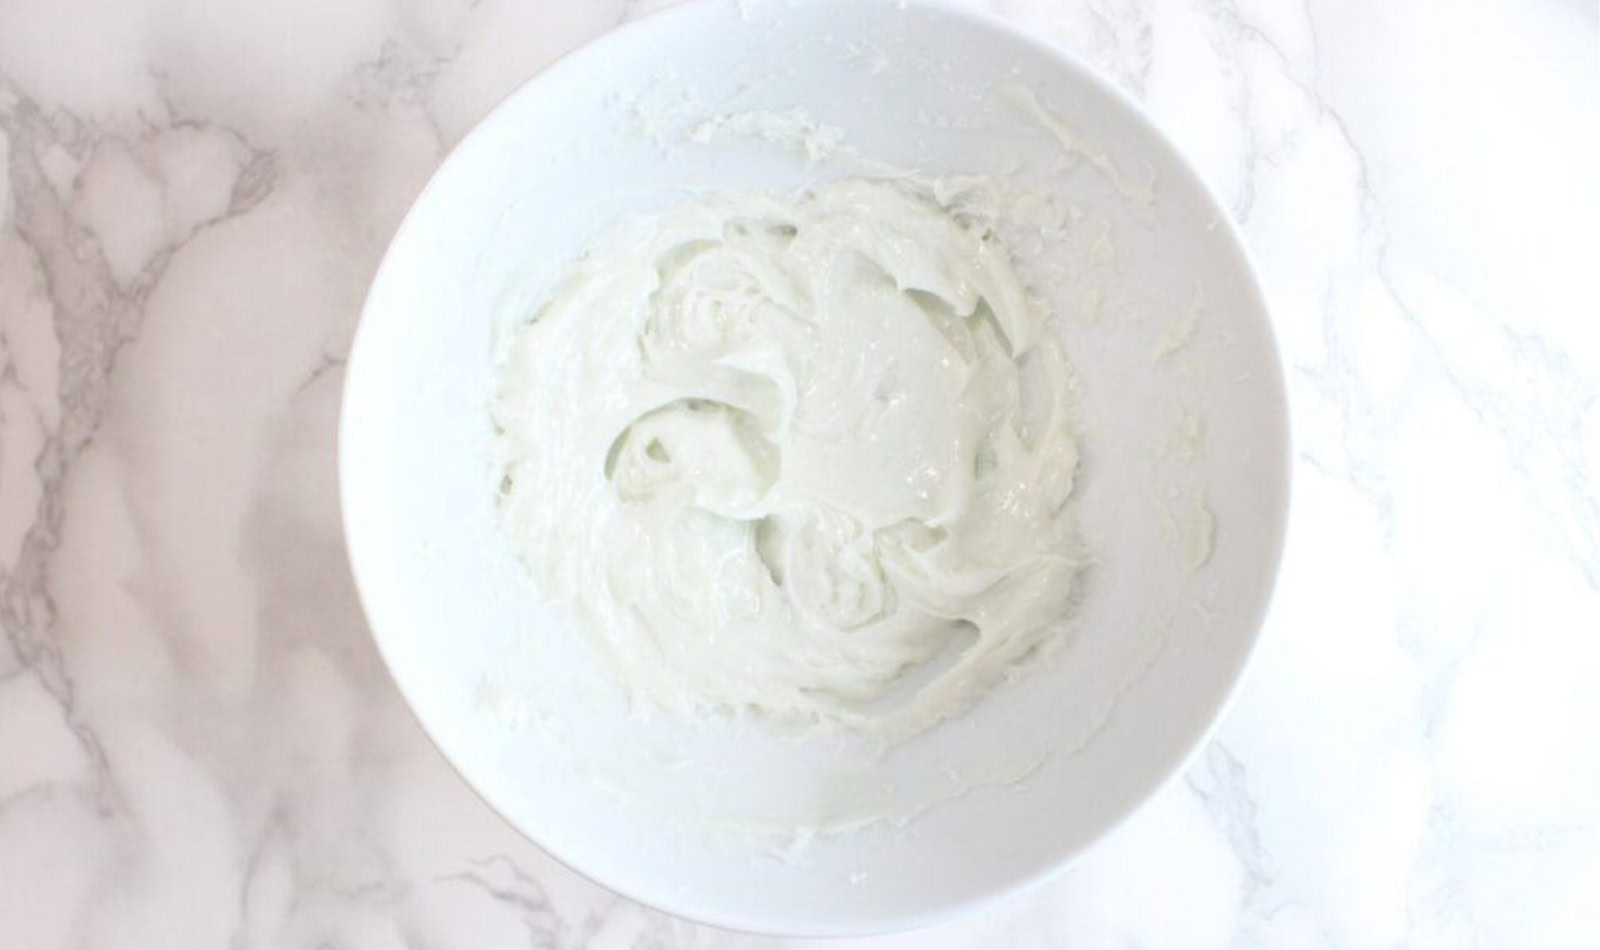 Image of white bowl on white marble countertop containing a creamy white substance